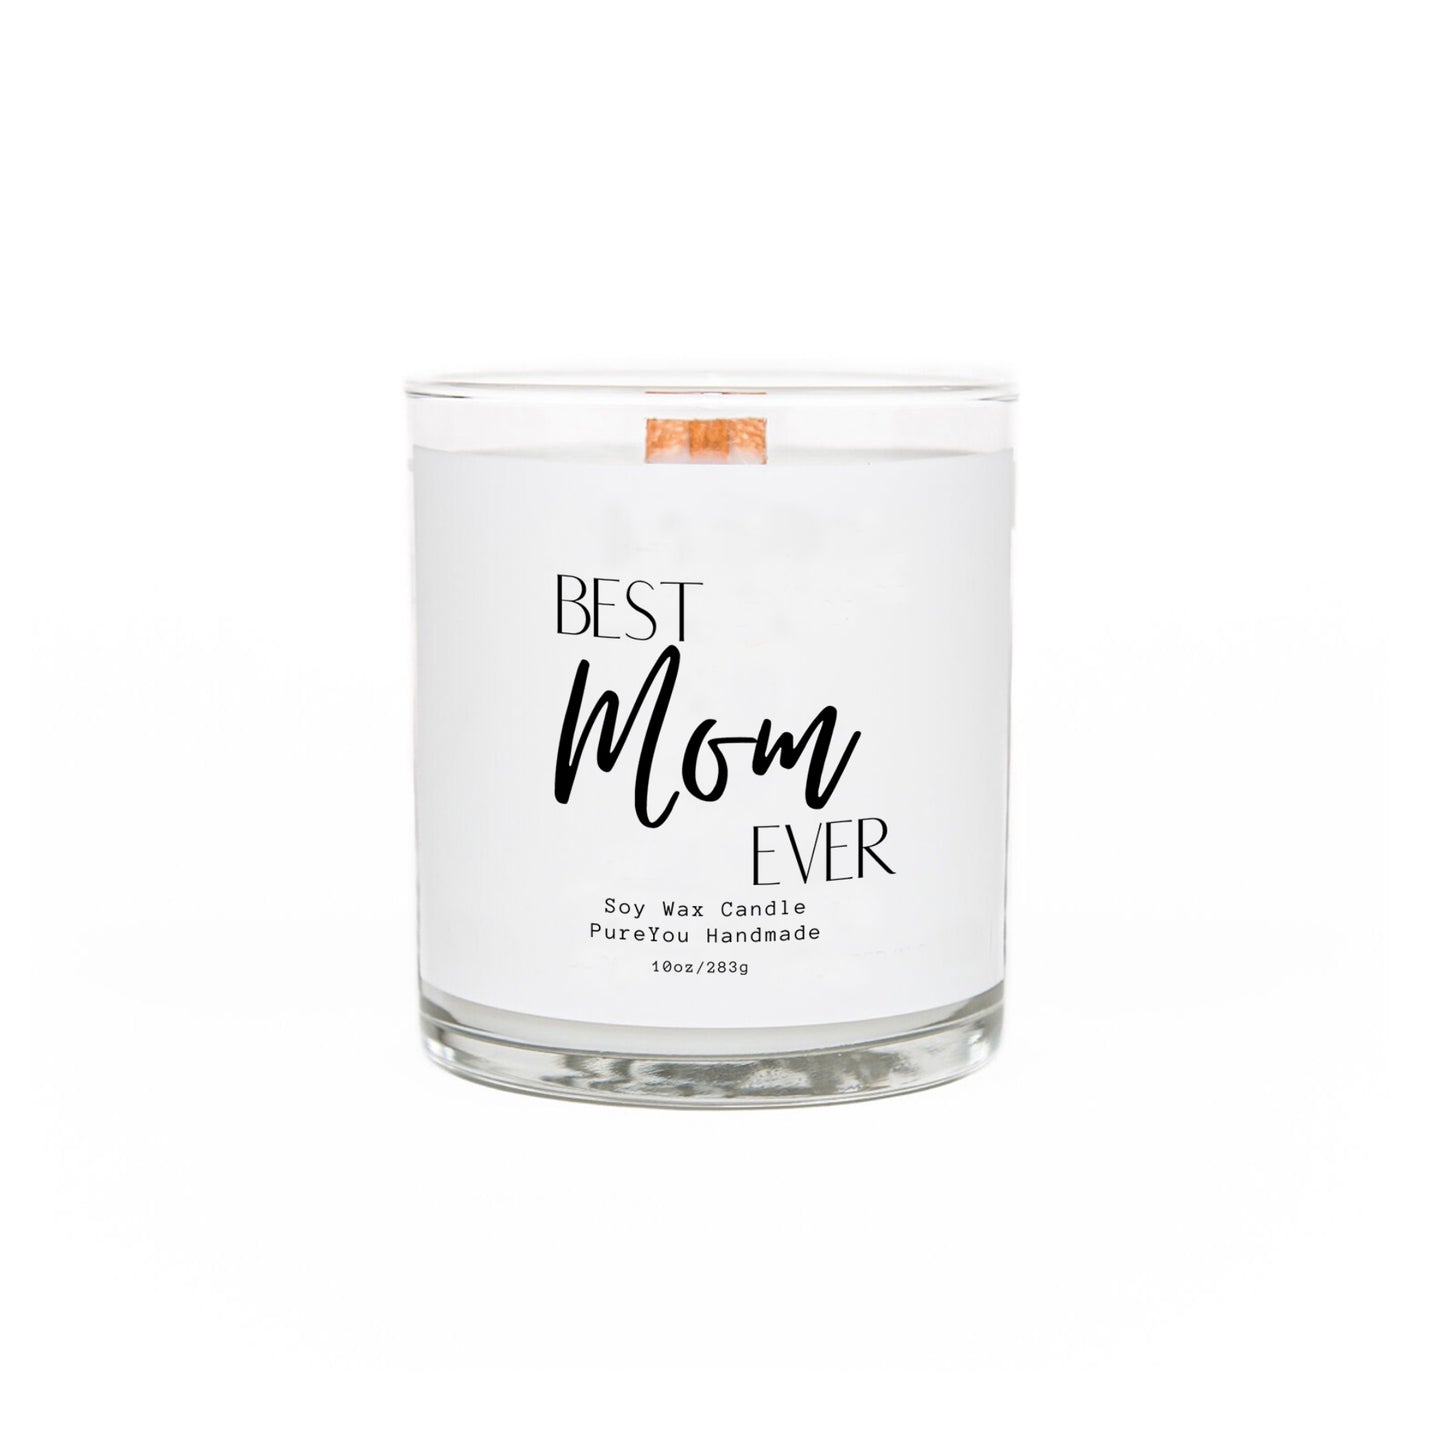 “Best Mom Ever” Soy Wax Candle